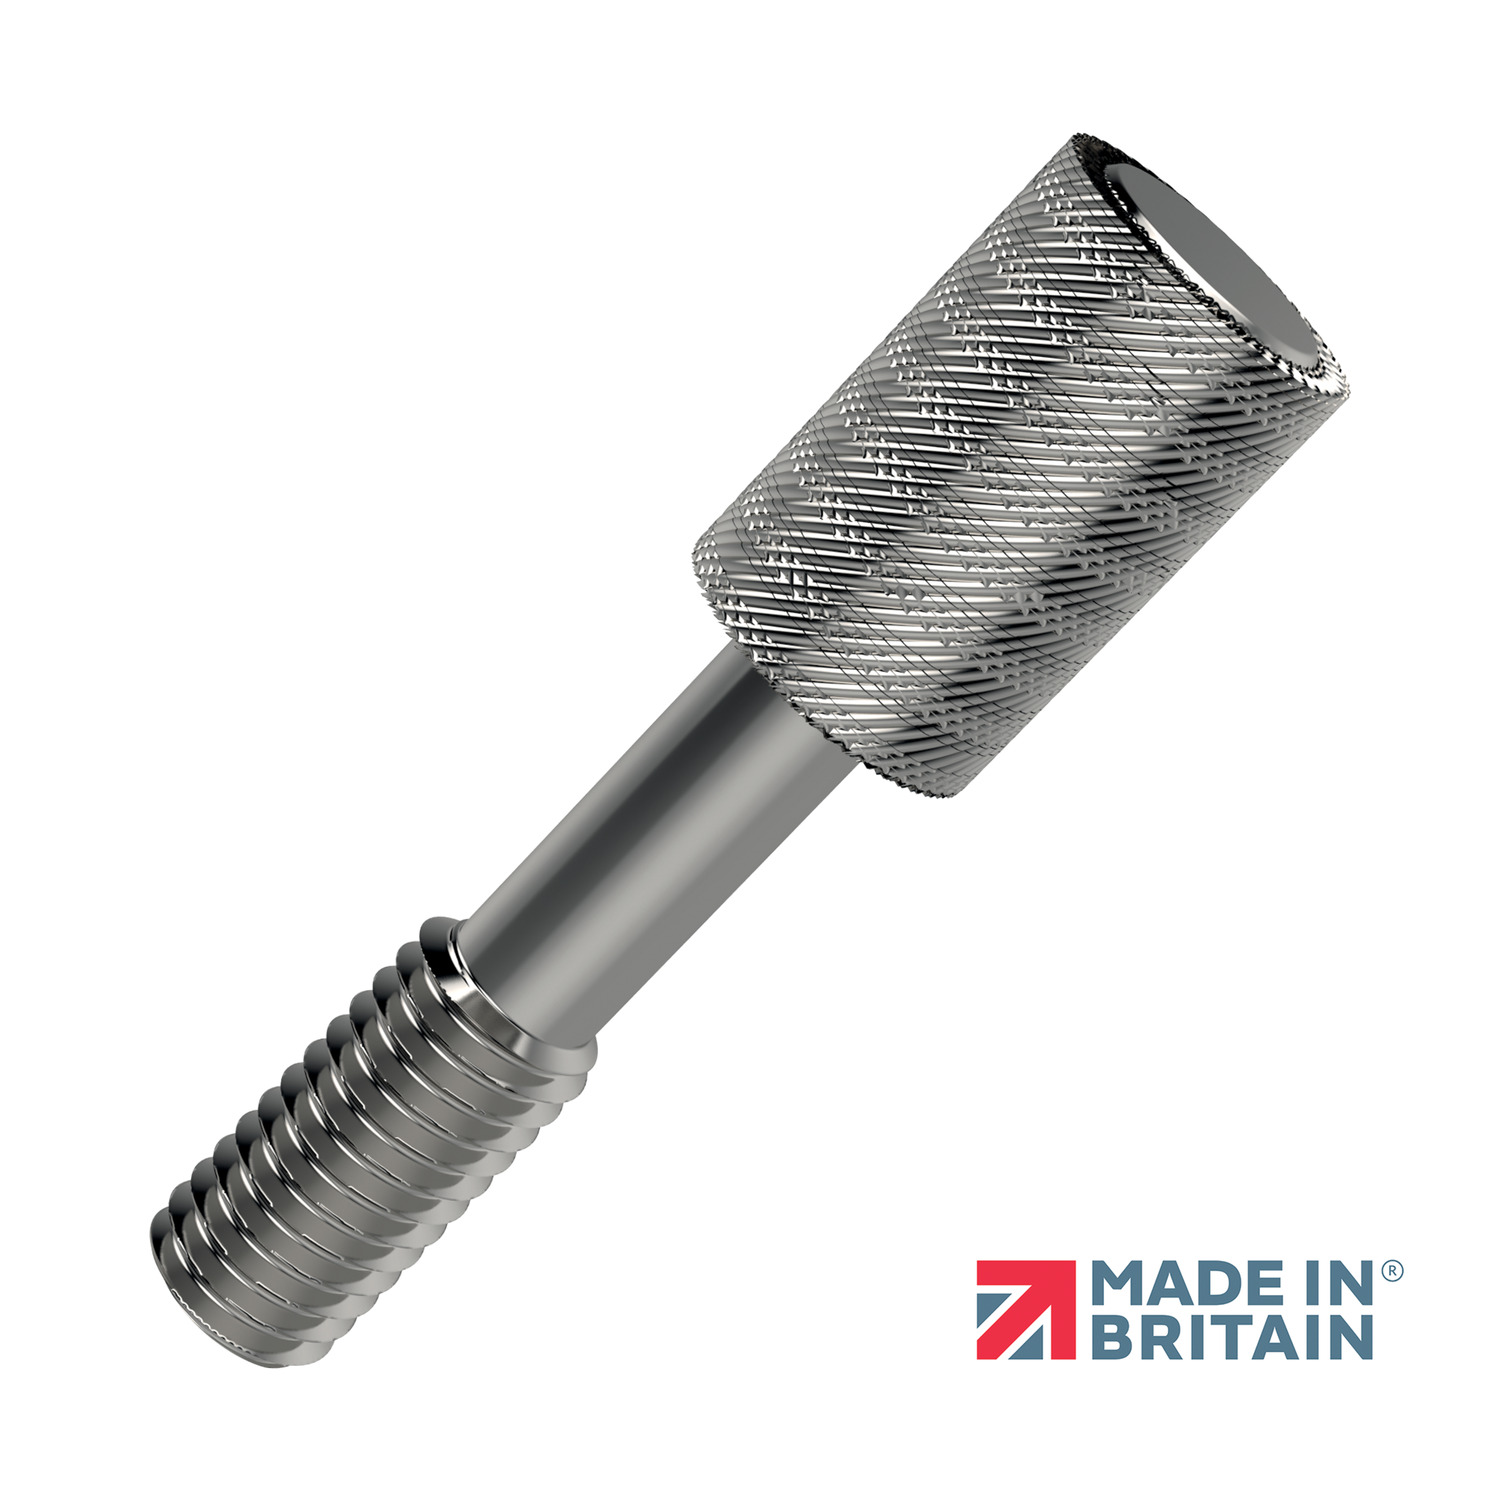 Captive Thumb Screws These are special thin diameter head type captive thumb screws and are available in M3, M4, M4, M5 and M6. Lengths from 8 - 60mm. Other captive thumb screws also available.